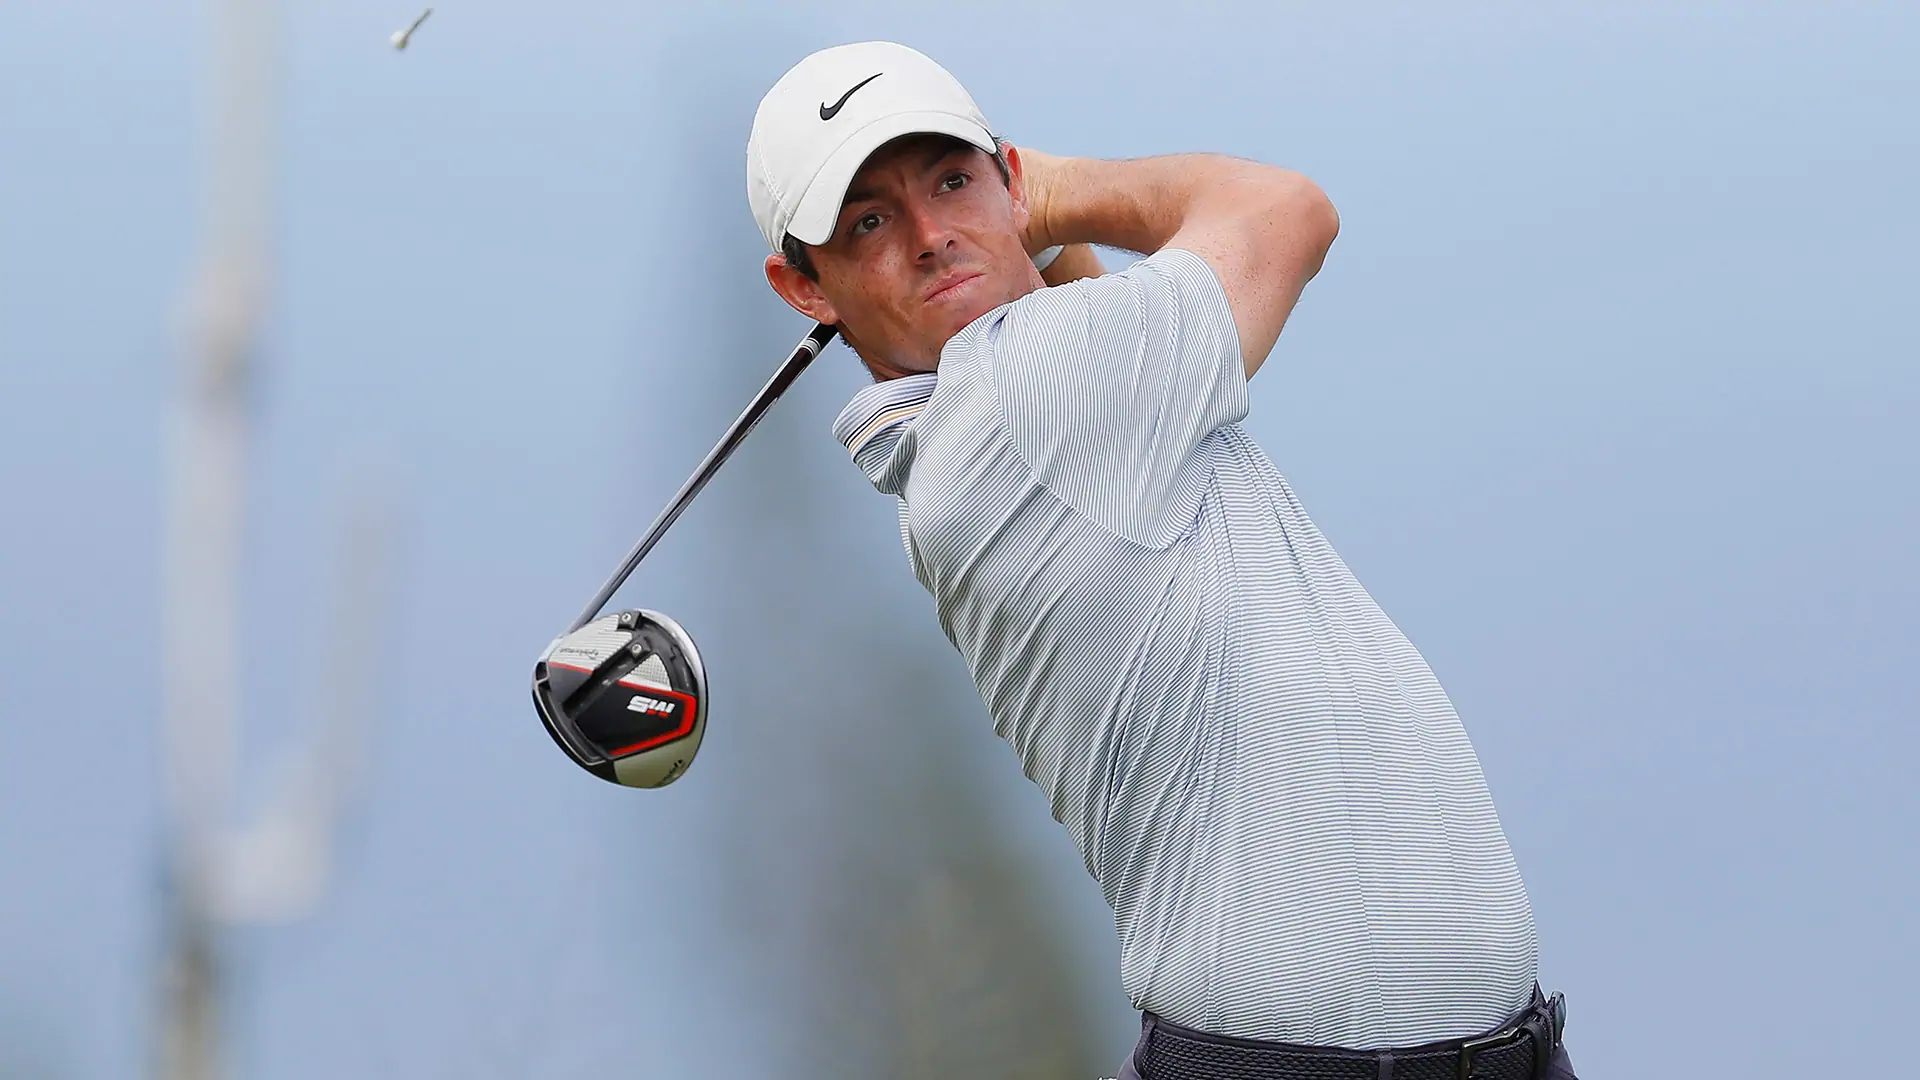 McIlroy adds 'low driver' to his arsenal for windy Kapalua and beyond